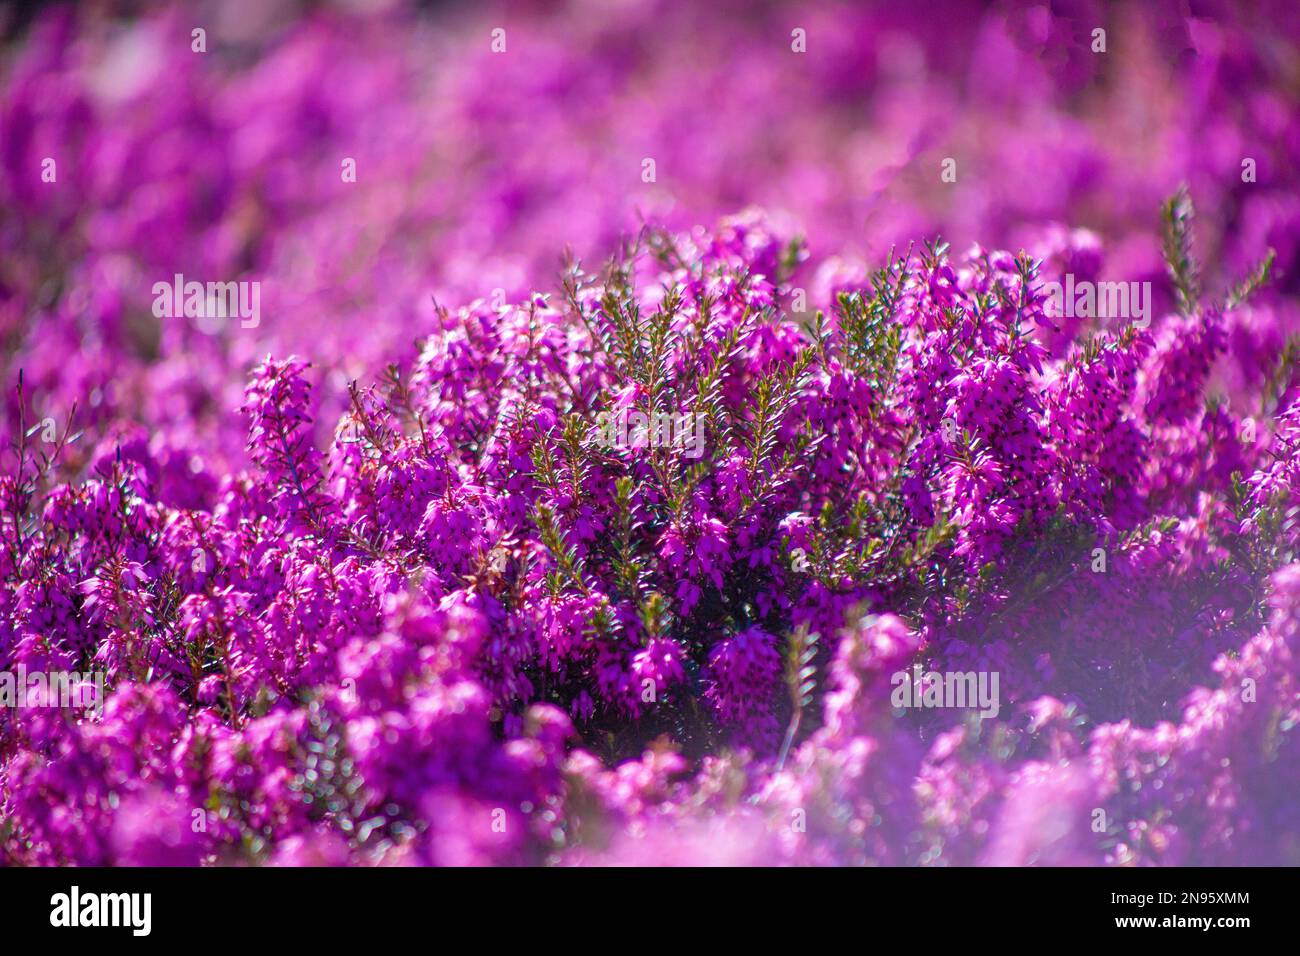 Heather flowers in the garden. Floral background. Violet, lilac flower. Field of pink heather. Blooming Calluna vulgaris flowers in forest Stock Photo